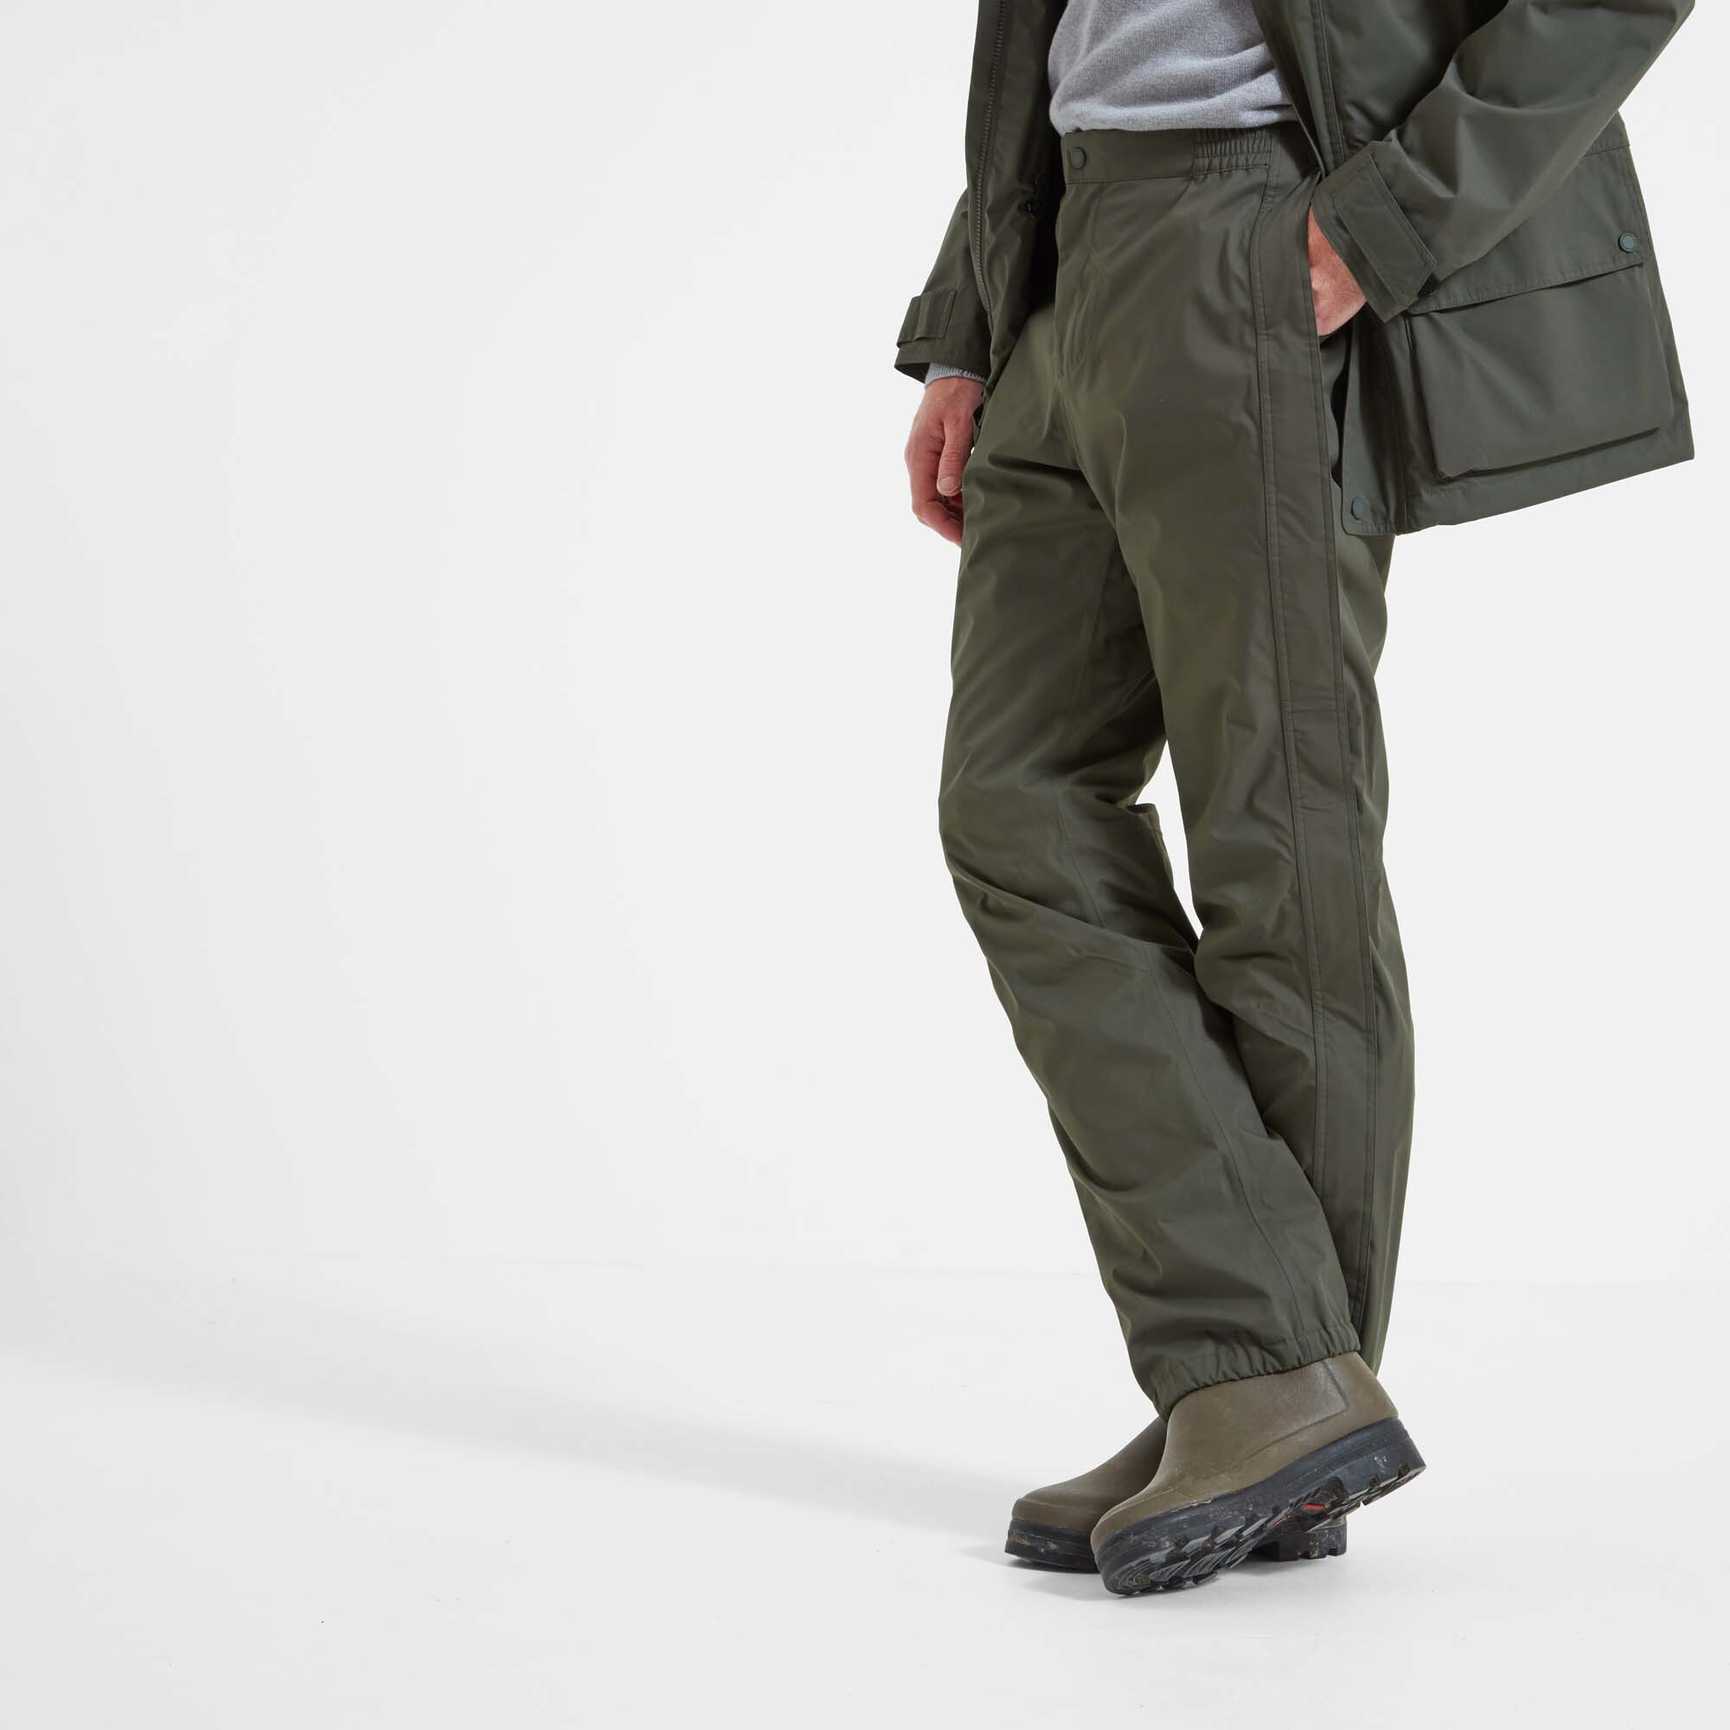 Schoffel Men's Saxby Overtrousers II in Tundra